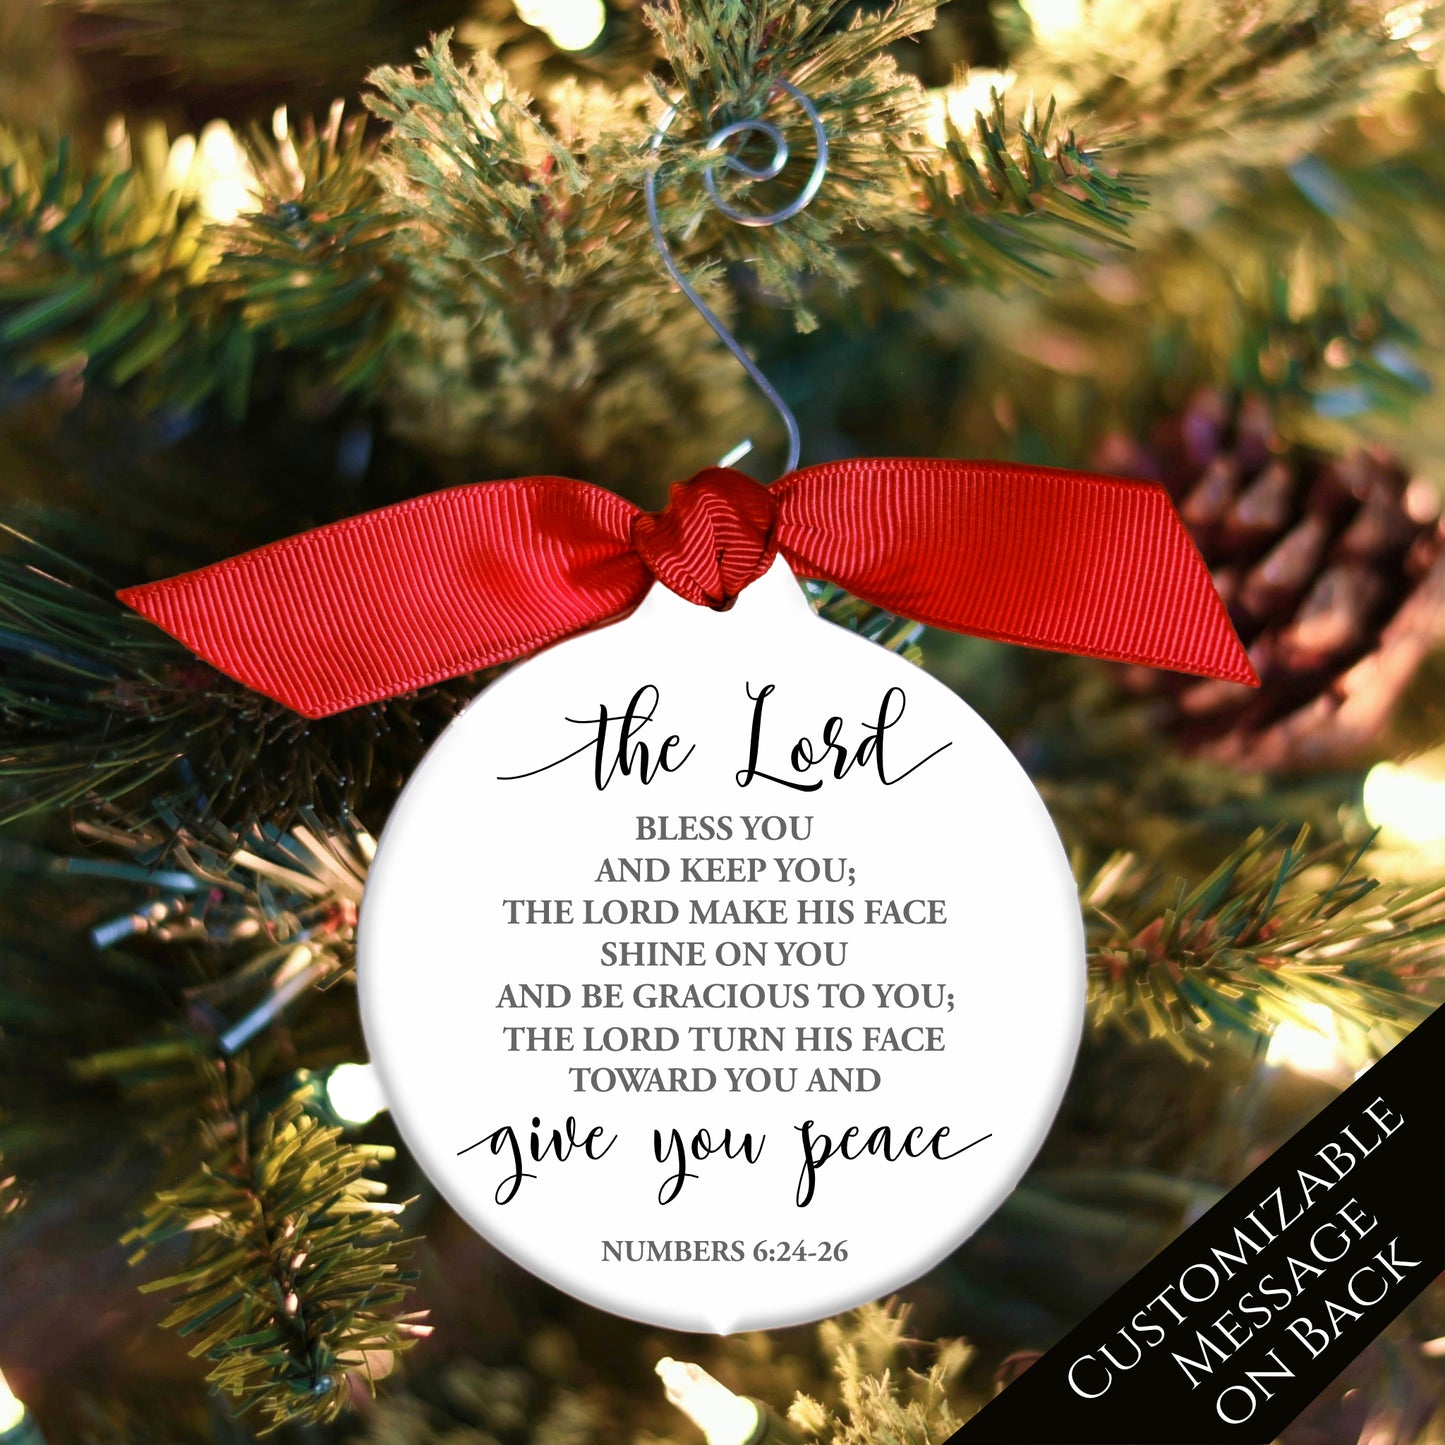 May the Lord Bless You and Keep You; The Lord Shine on you and be gracious to you; The Lord turn His face towards you and give you peace- Numbers 6:24-26, Christmas Ornament, Bible Verse, Personalized, Custom, Christian Gift - Red Ribbon